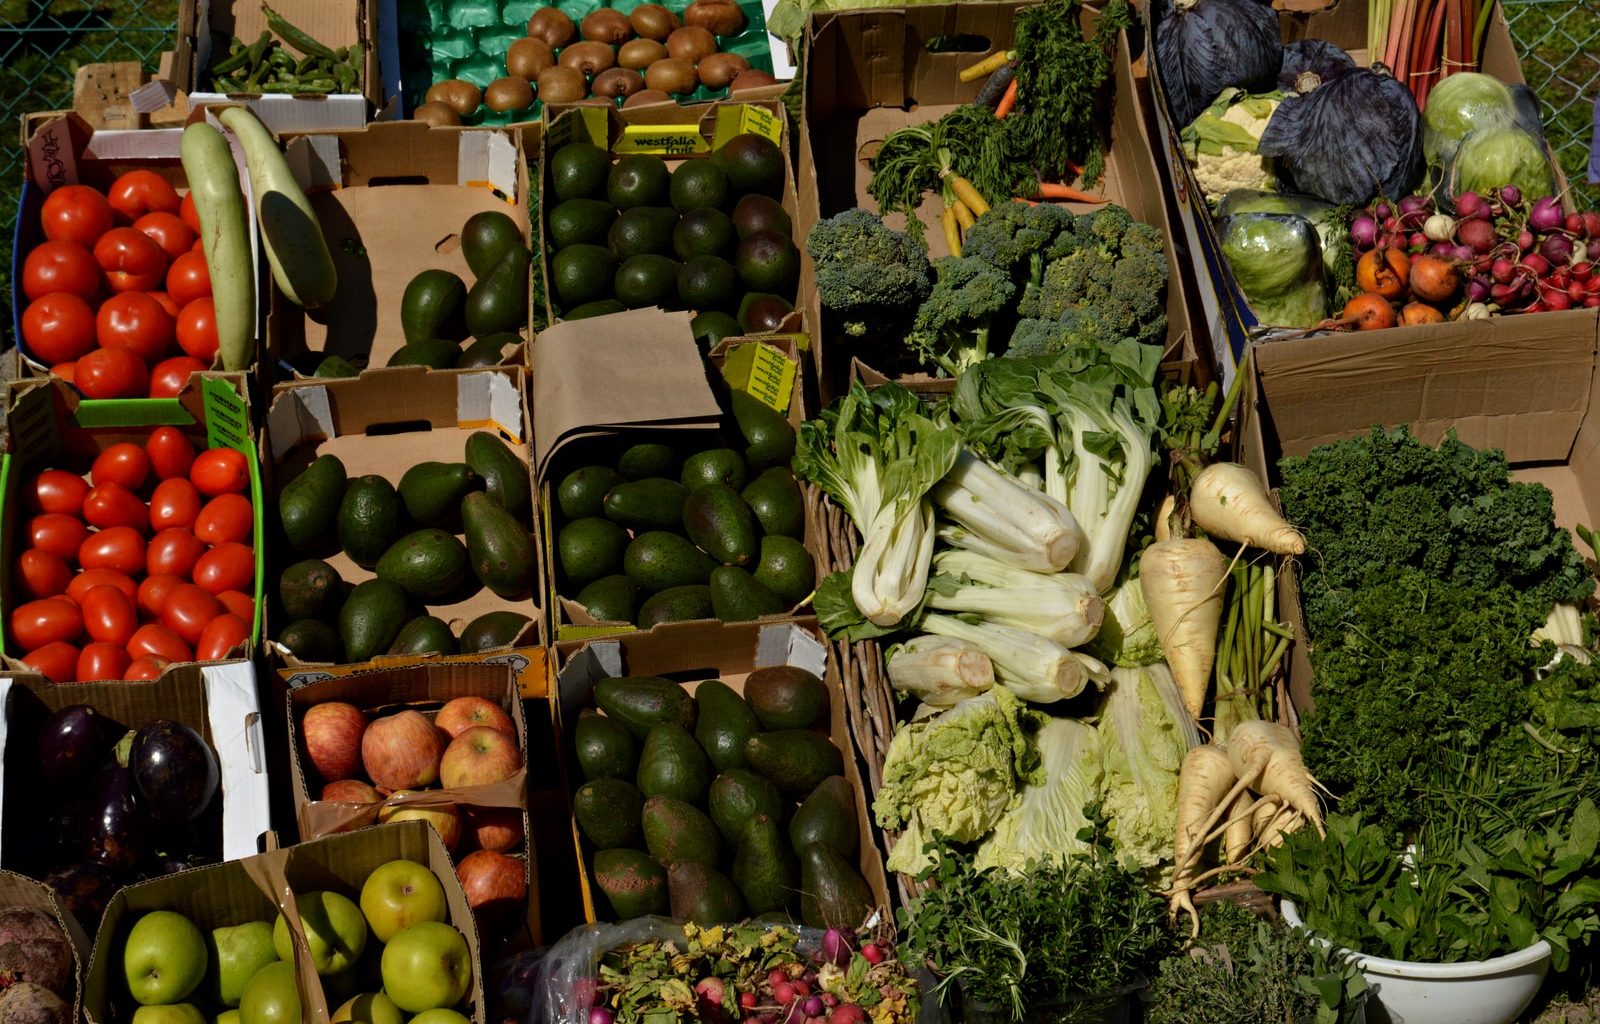 green and white vegetables on market